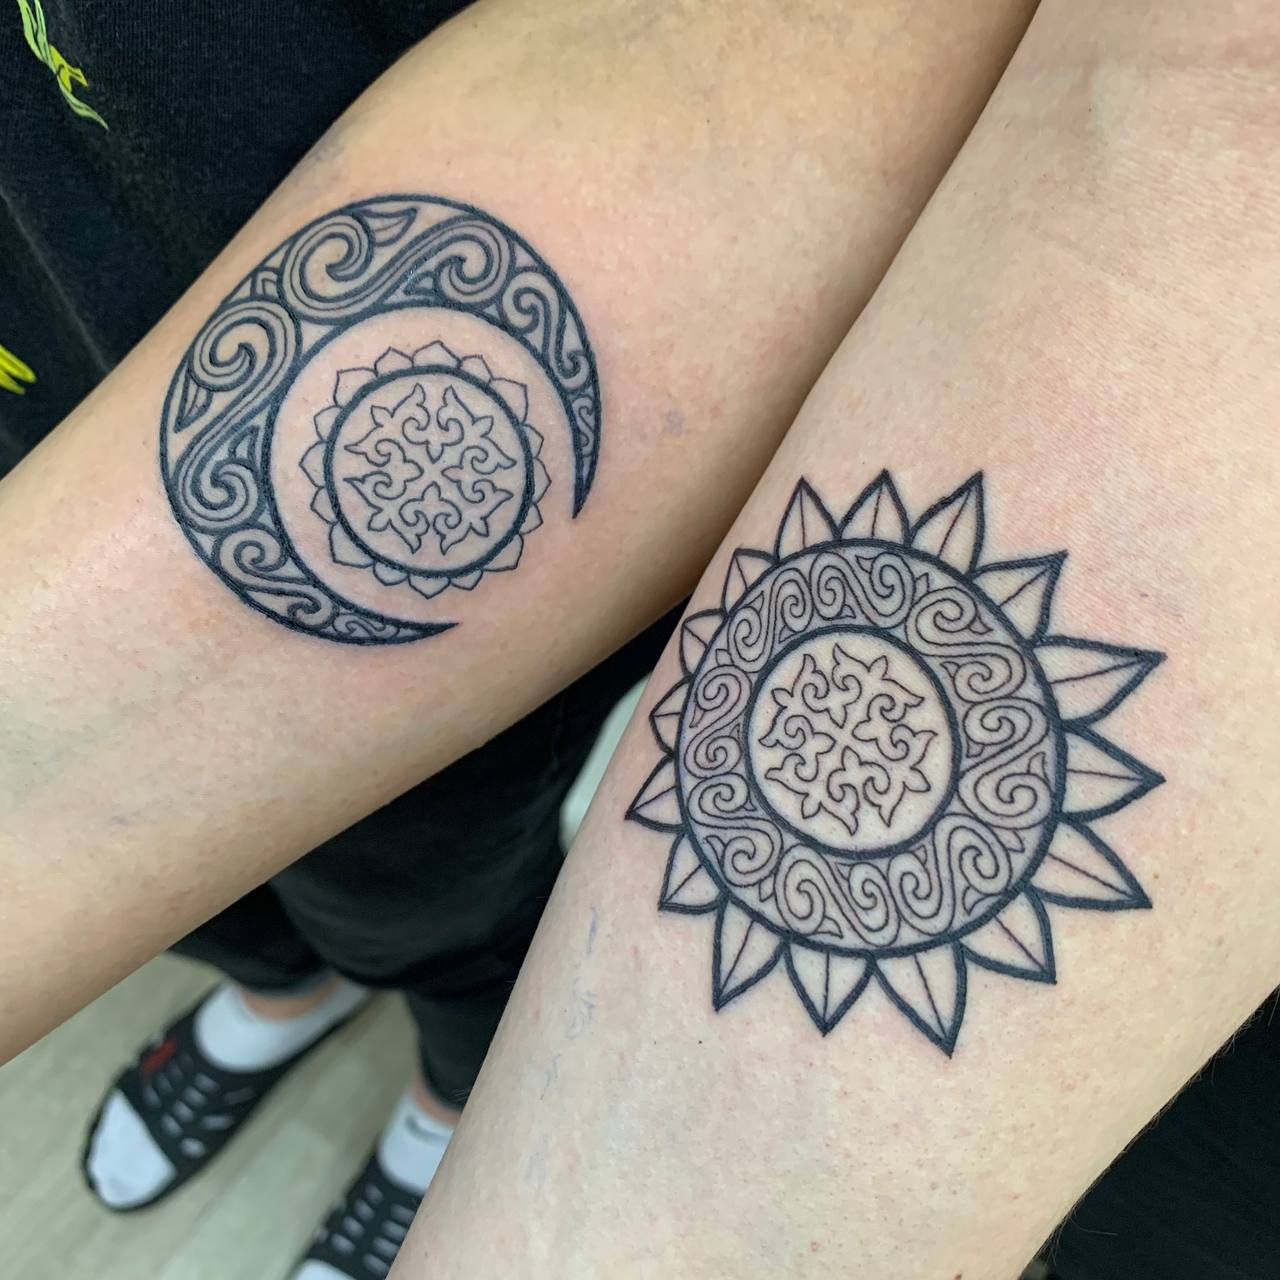 In Tengriasm the sun and the moon symbolize the eternal cycle of life and the ever